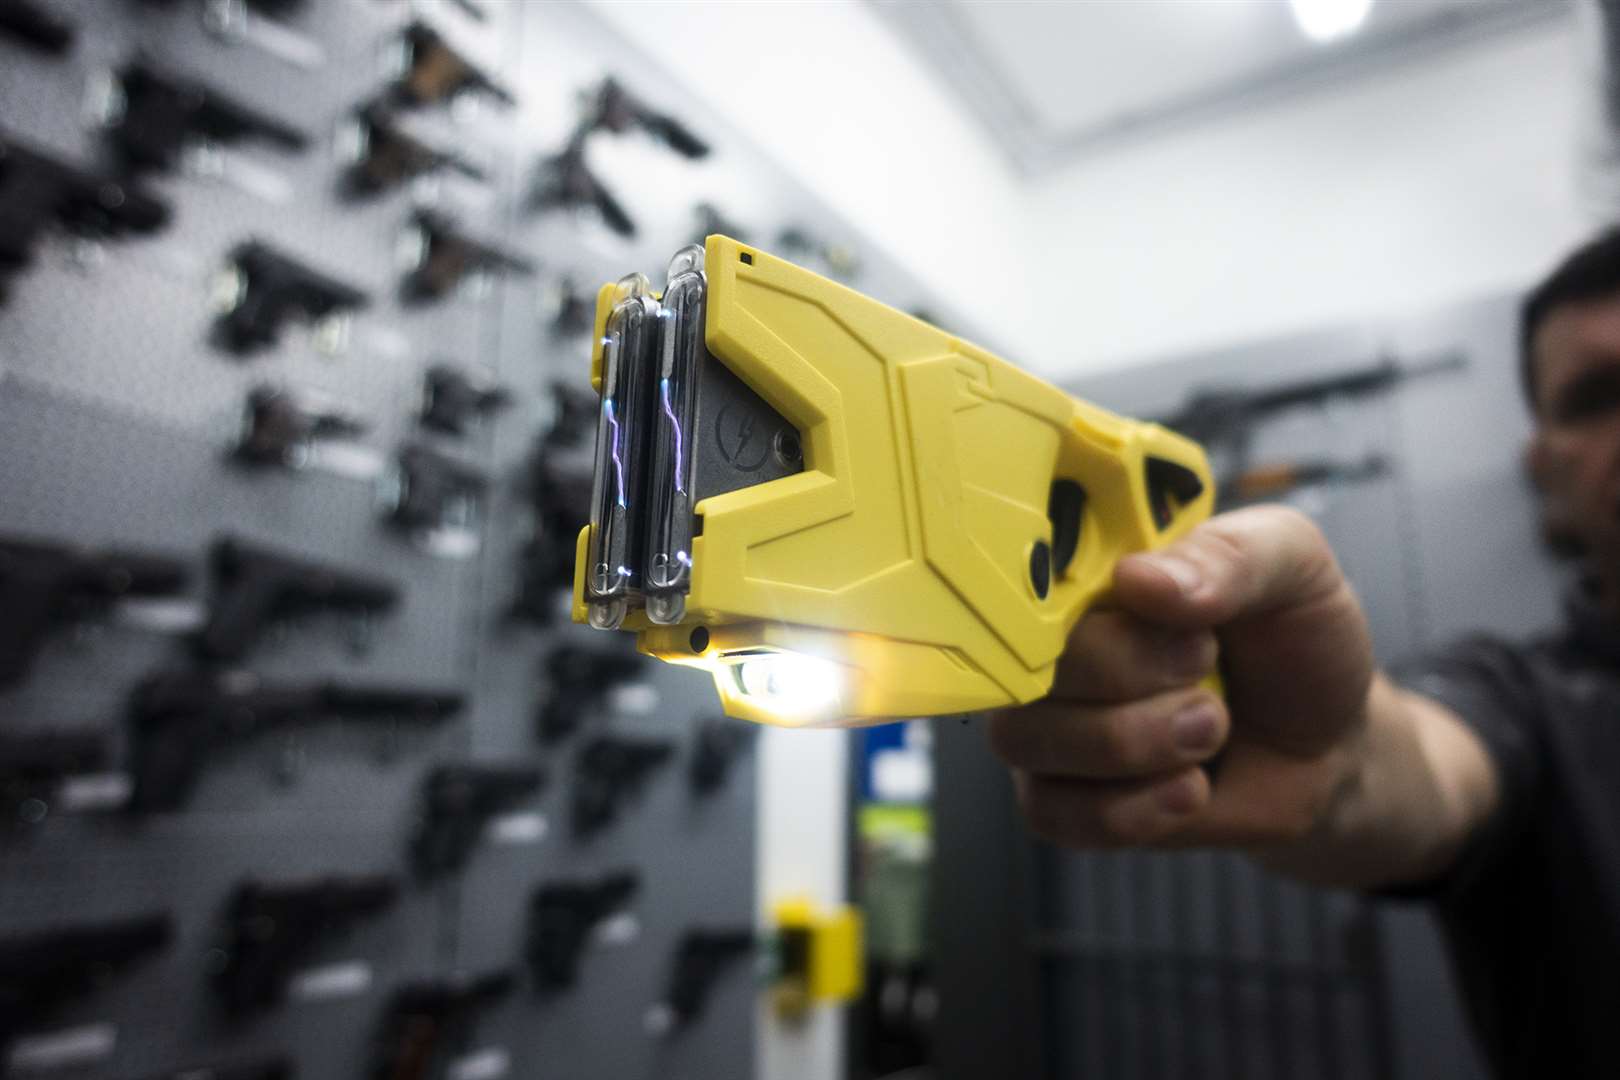 Police could apply for Home Office funding to buy more Tasers (Durham Police/PA)